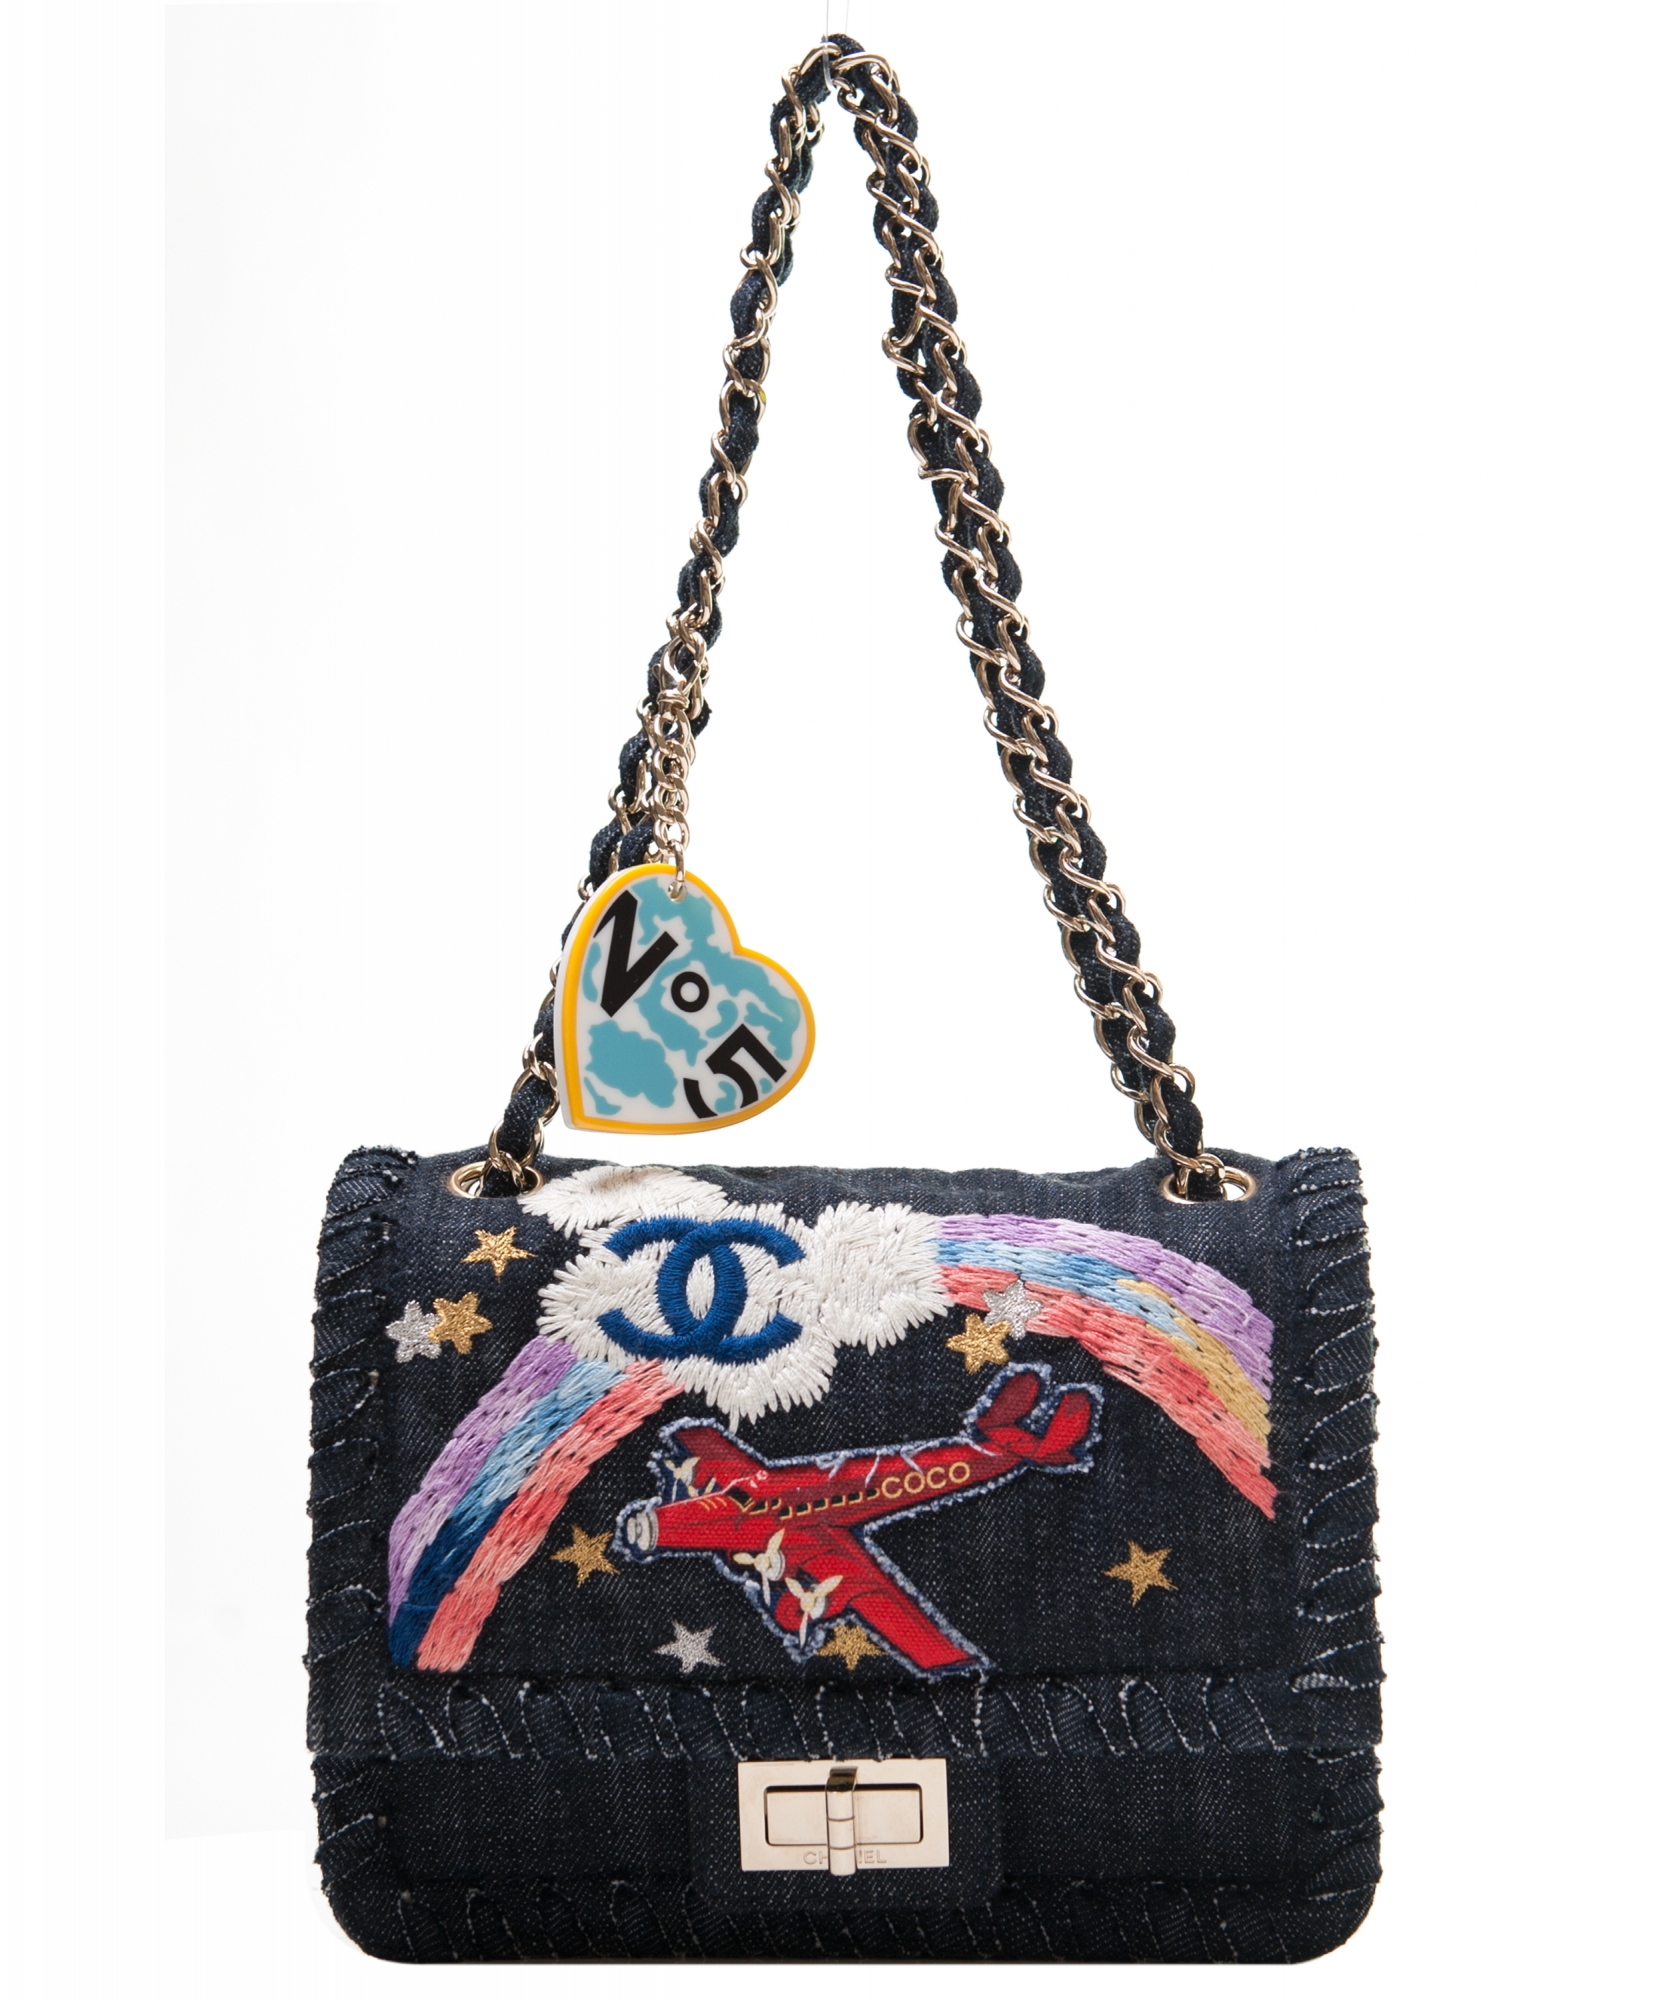 Chanel Denim Multicolor Embroidered Flap Bag - Limited Edition